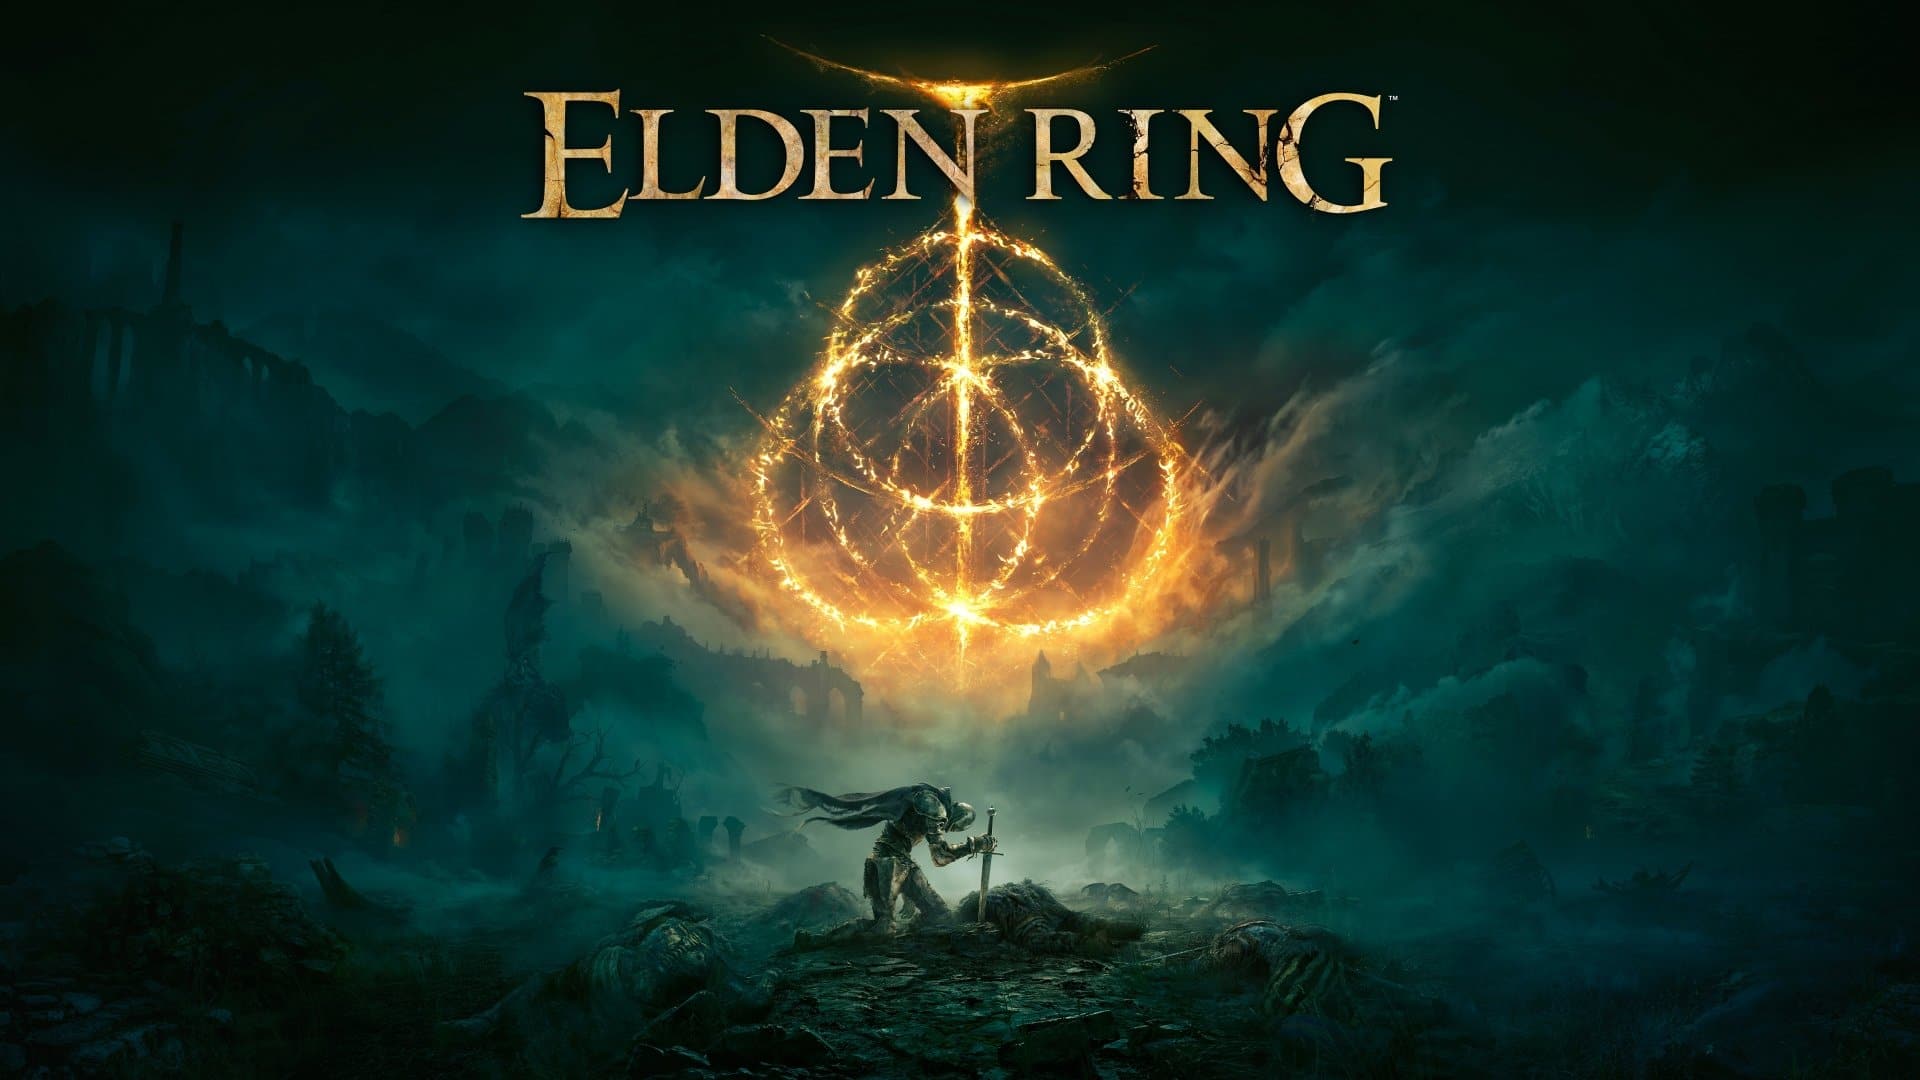 Elden Ring confirms that more updates are on the way, GamersRD